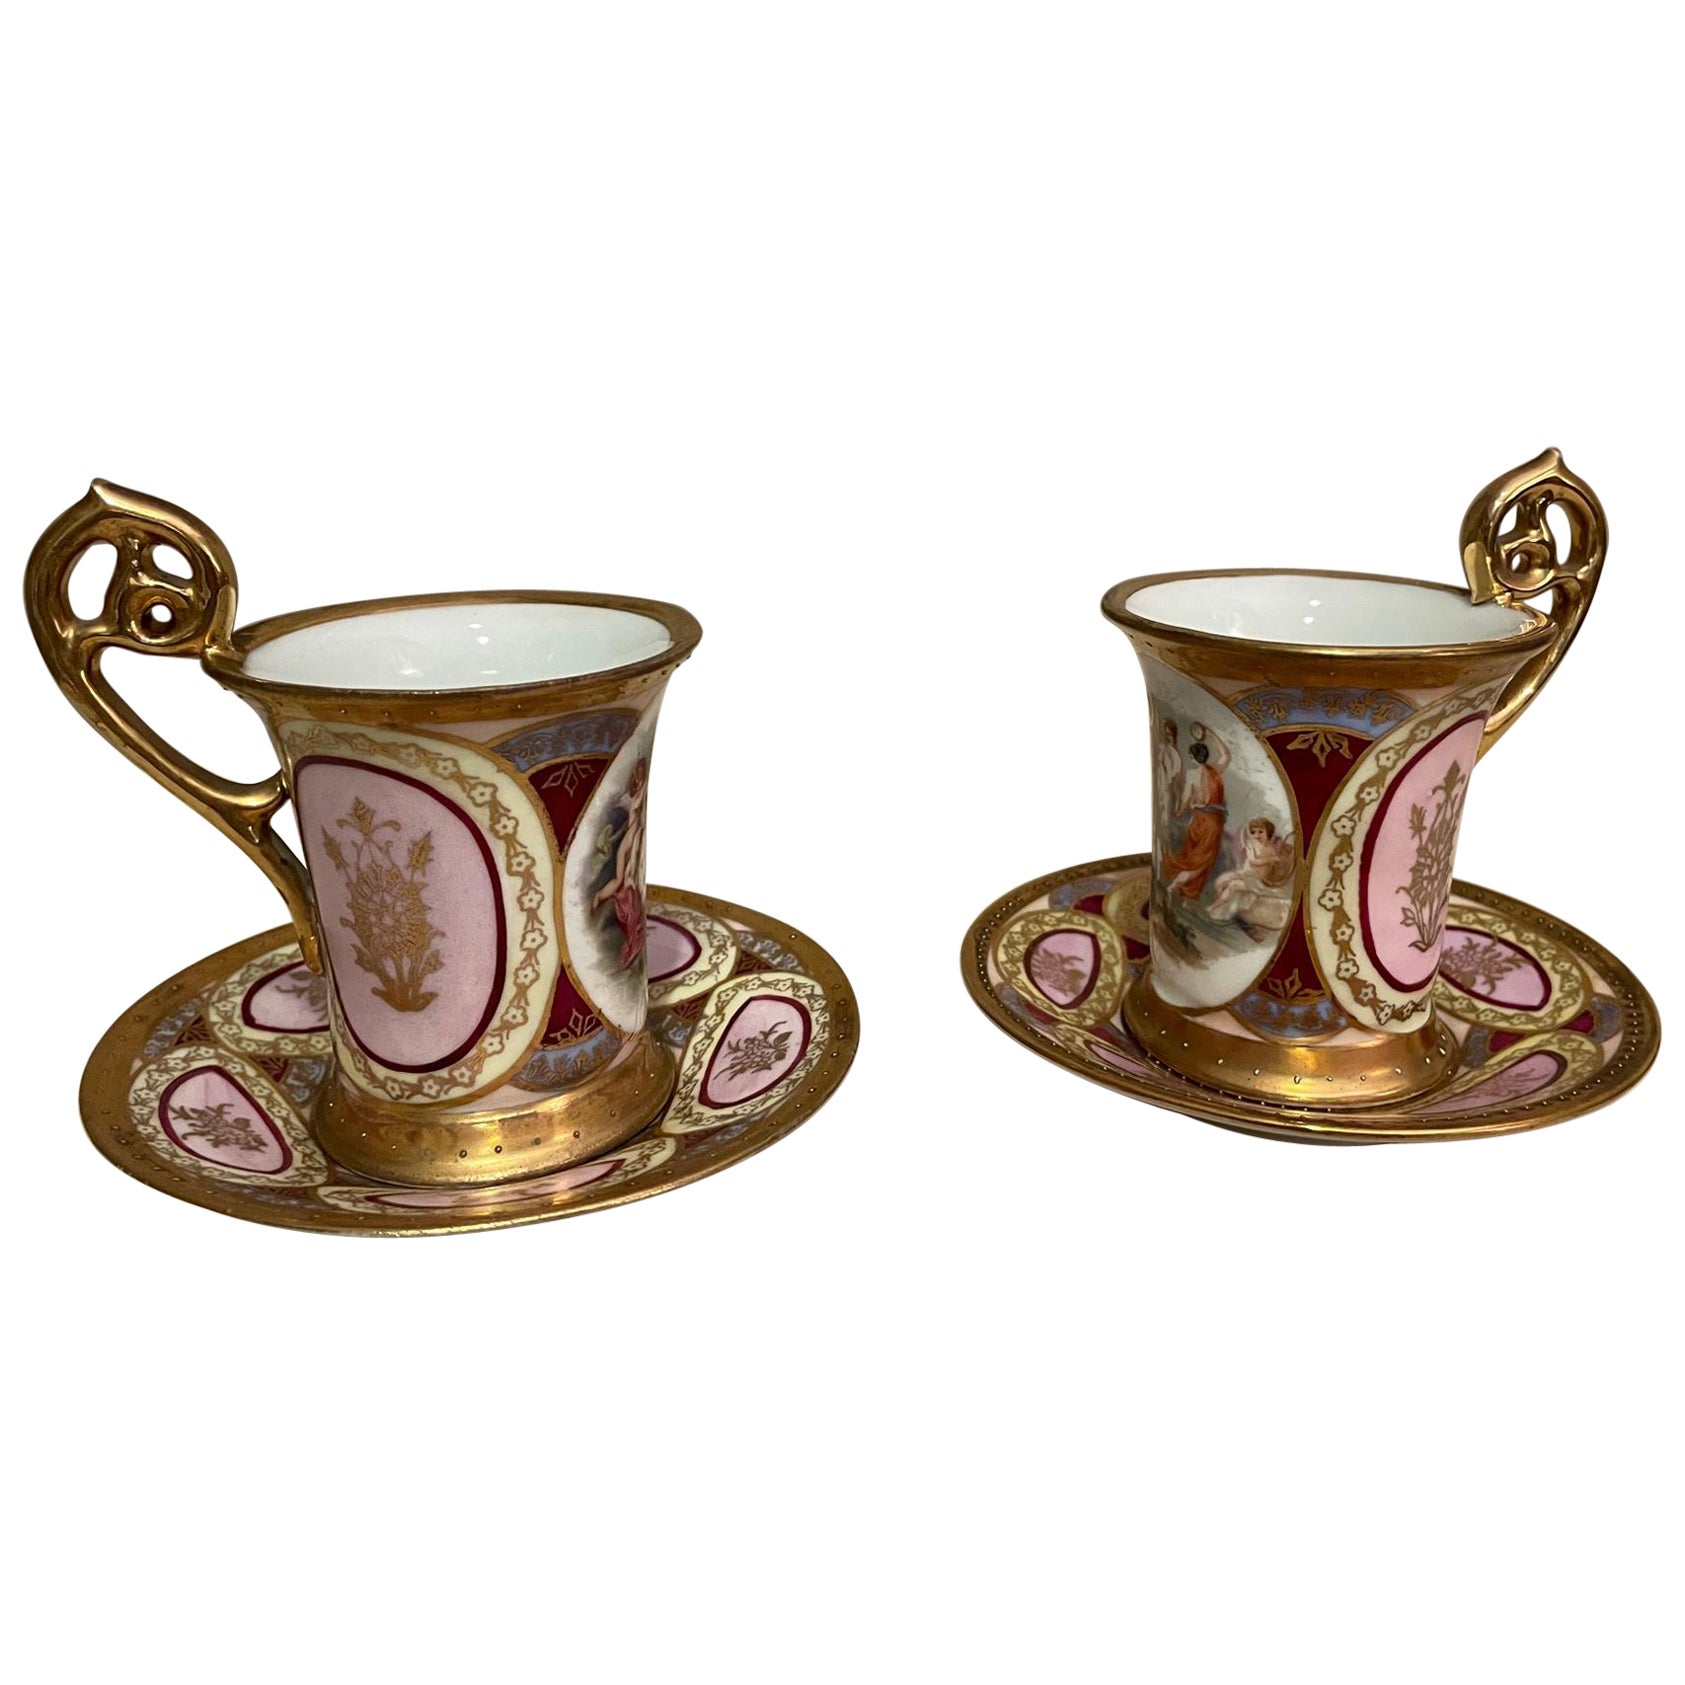 Early 20th Century Vienna Porcelain Set of Tea Cups, 1900s For Sale